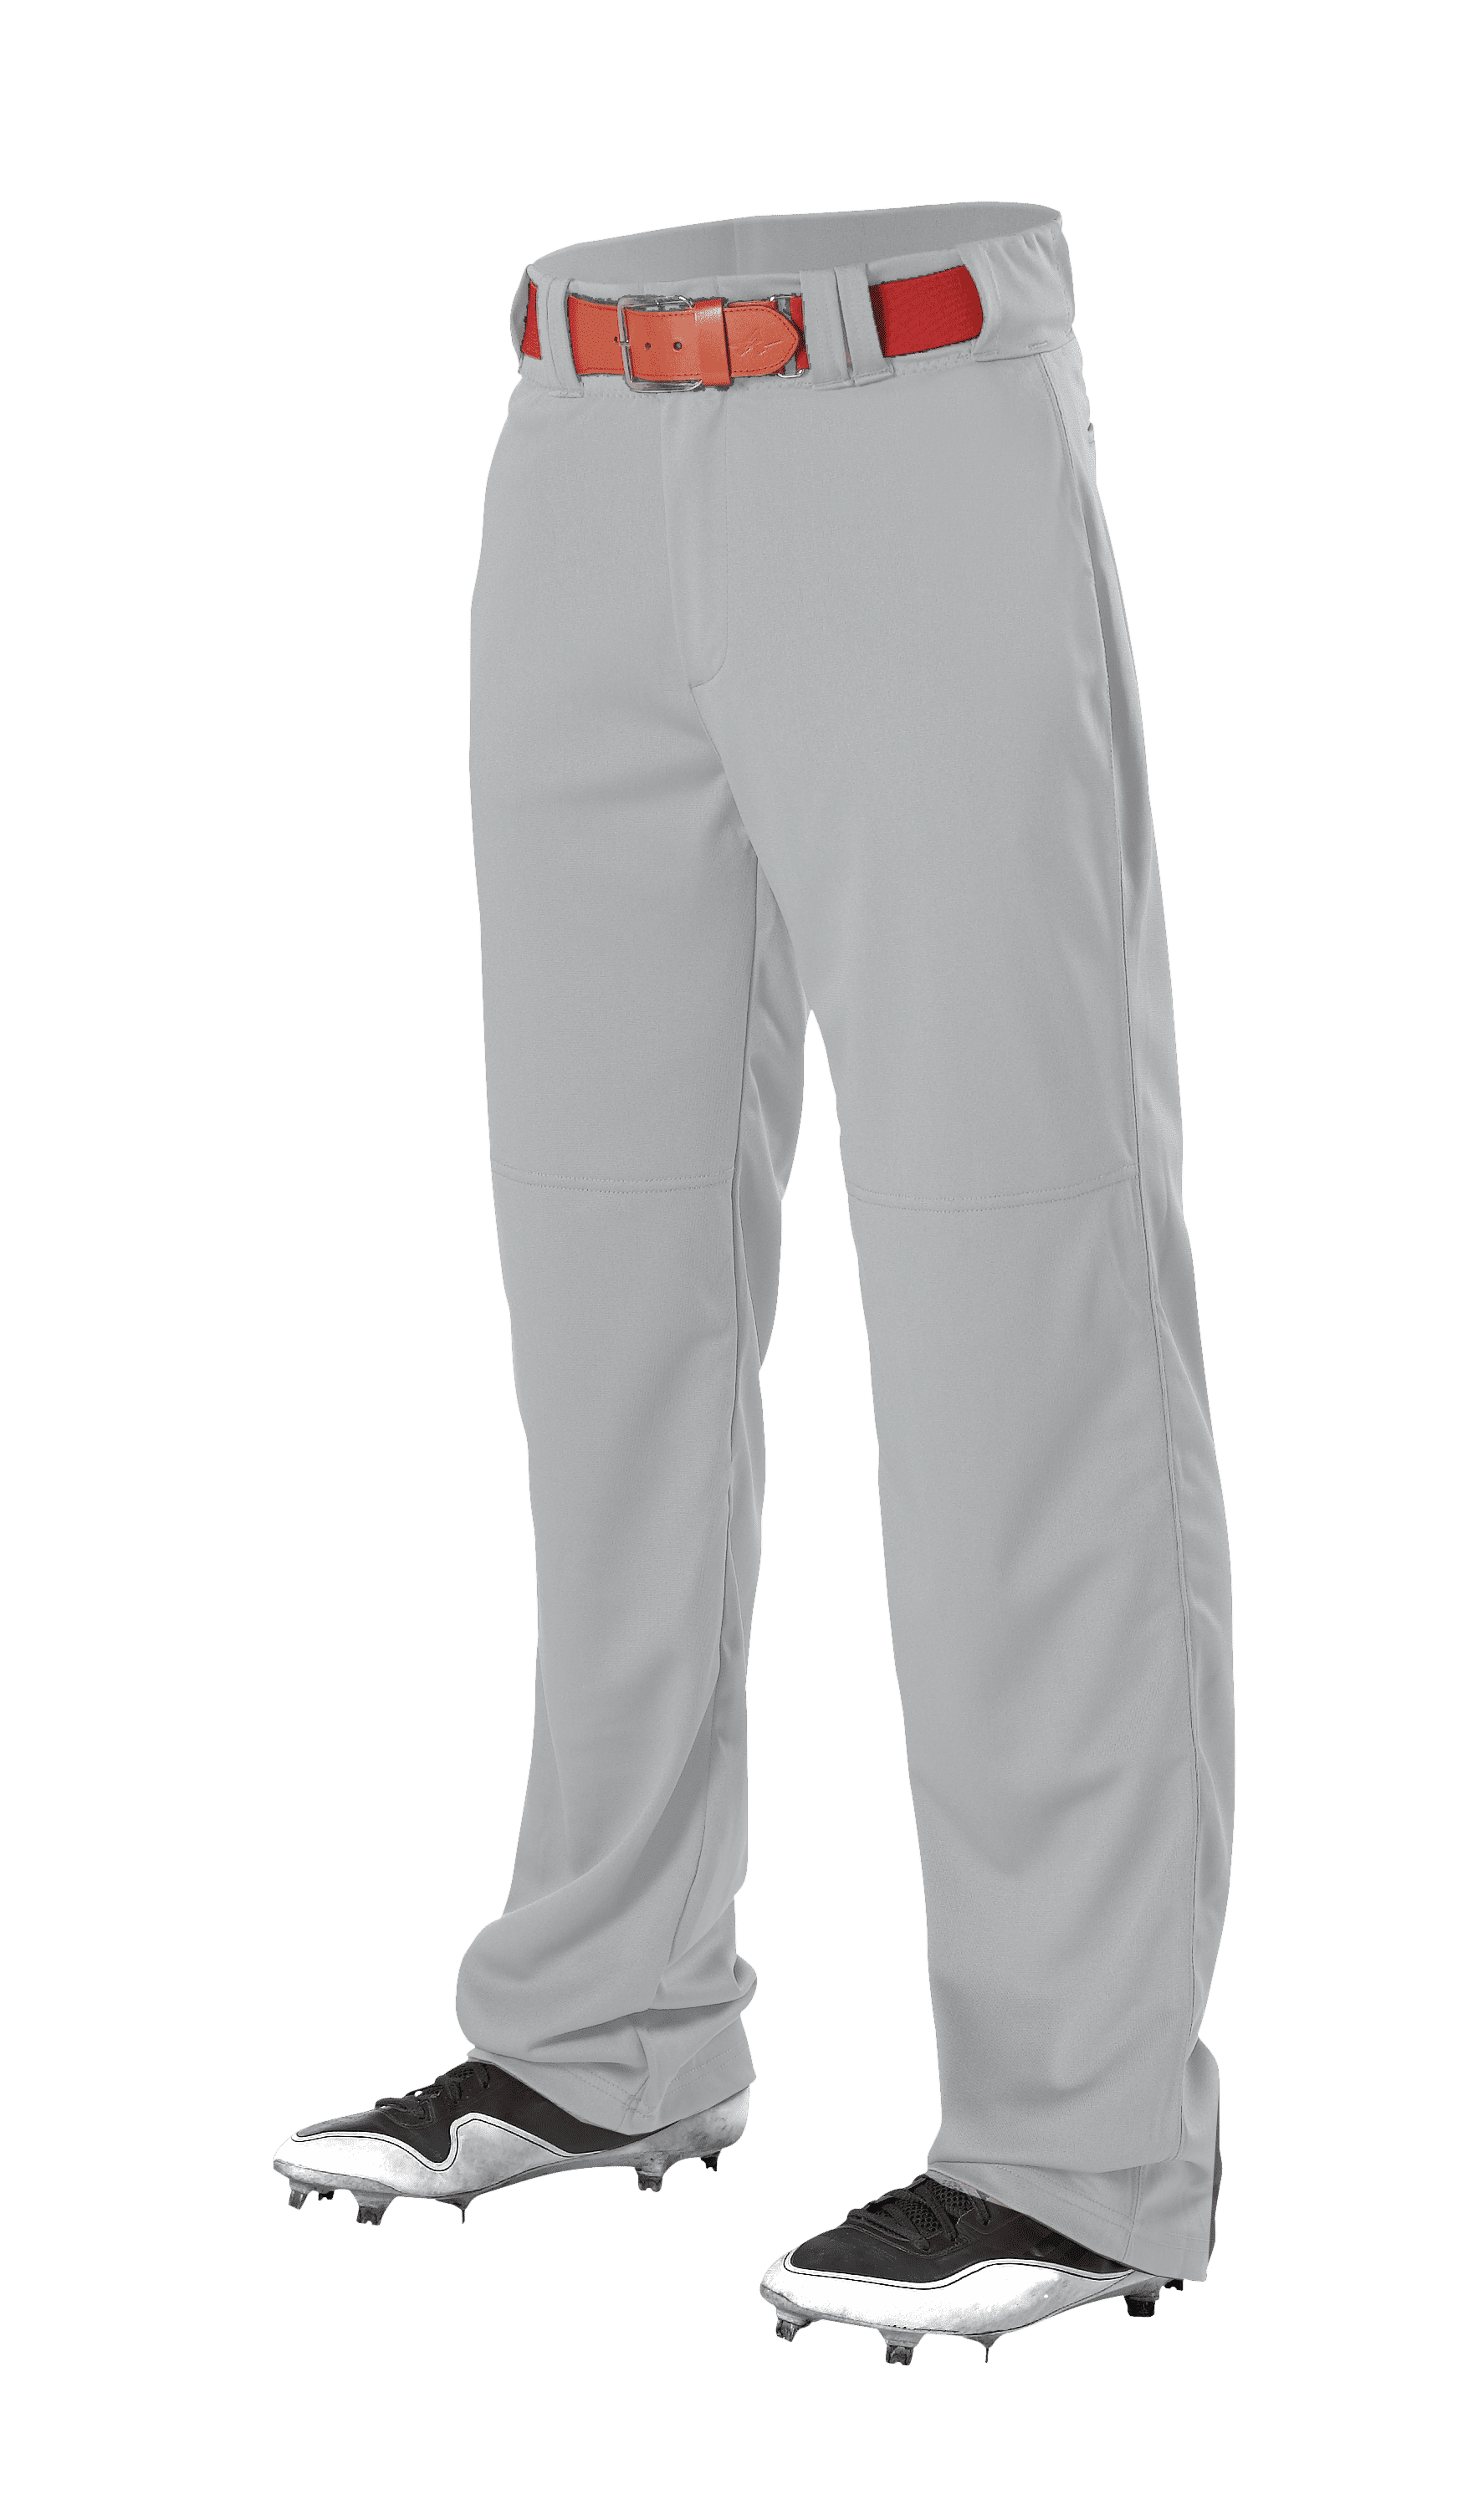 Gray Details about   Wilson Deluxe Belt Loop Youth Baseball Pant WTA4228 Size MED 